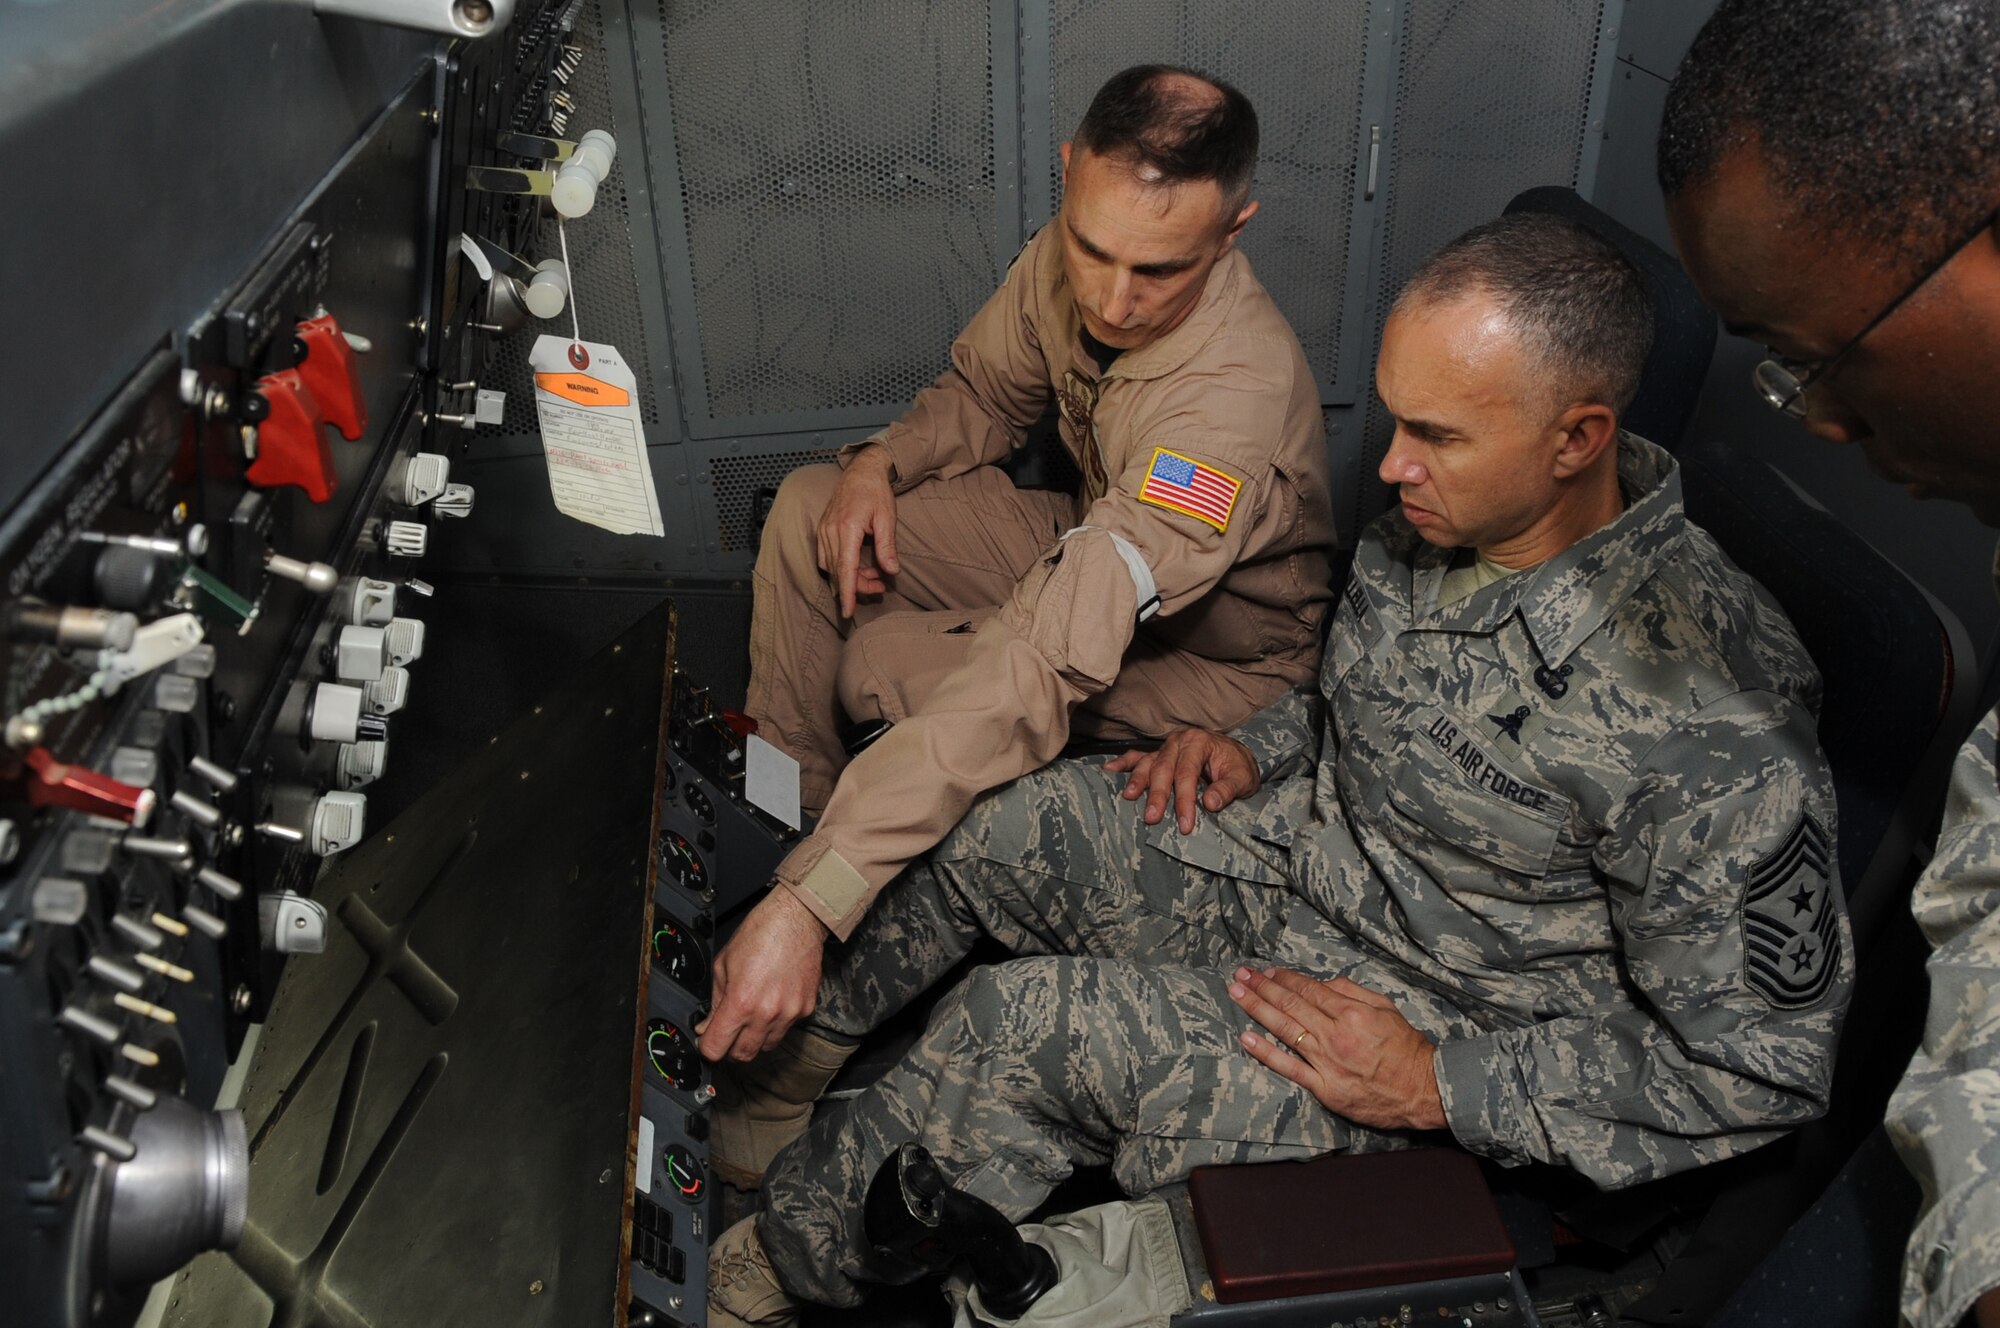 Chief Master Sgt. Ralph Snyder, 380th Expeditionary Operations Group chief enlisted manager, shows Chief Master Sgt. Mark Villella, command chief master sergeant for Air Forces Central Command, the in-flight refueling pod of a KC-10 Extender during Chief Villella's visit to the 380th Air Expeditionary Wing at a non-disclosed base in Southwest Asia on Jan. 6, 2010.  During his visit, Chief Villella learned about the diverse mission of the 380th AEW that includes air refueling, surveillance, and reconnaissance in support of overseas contingency operations in Southwest Asia. The wing supports Operations Iraqi Freedom and Enduring Freedom and the Combined Joint Task Force-Horn of Africa. (U.S. Air Force Photo/Senior Airman Jenifer Calhoun/Released)